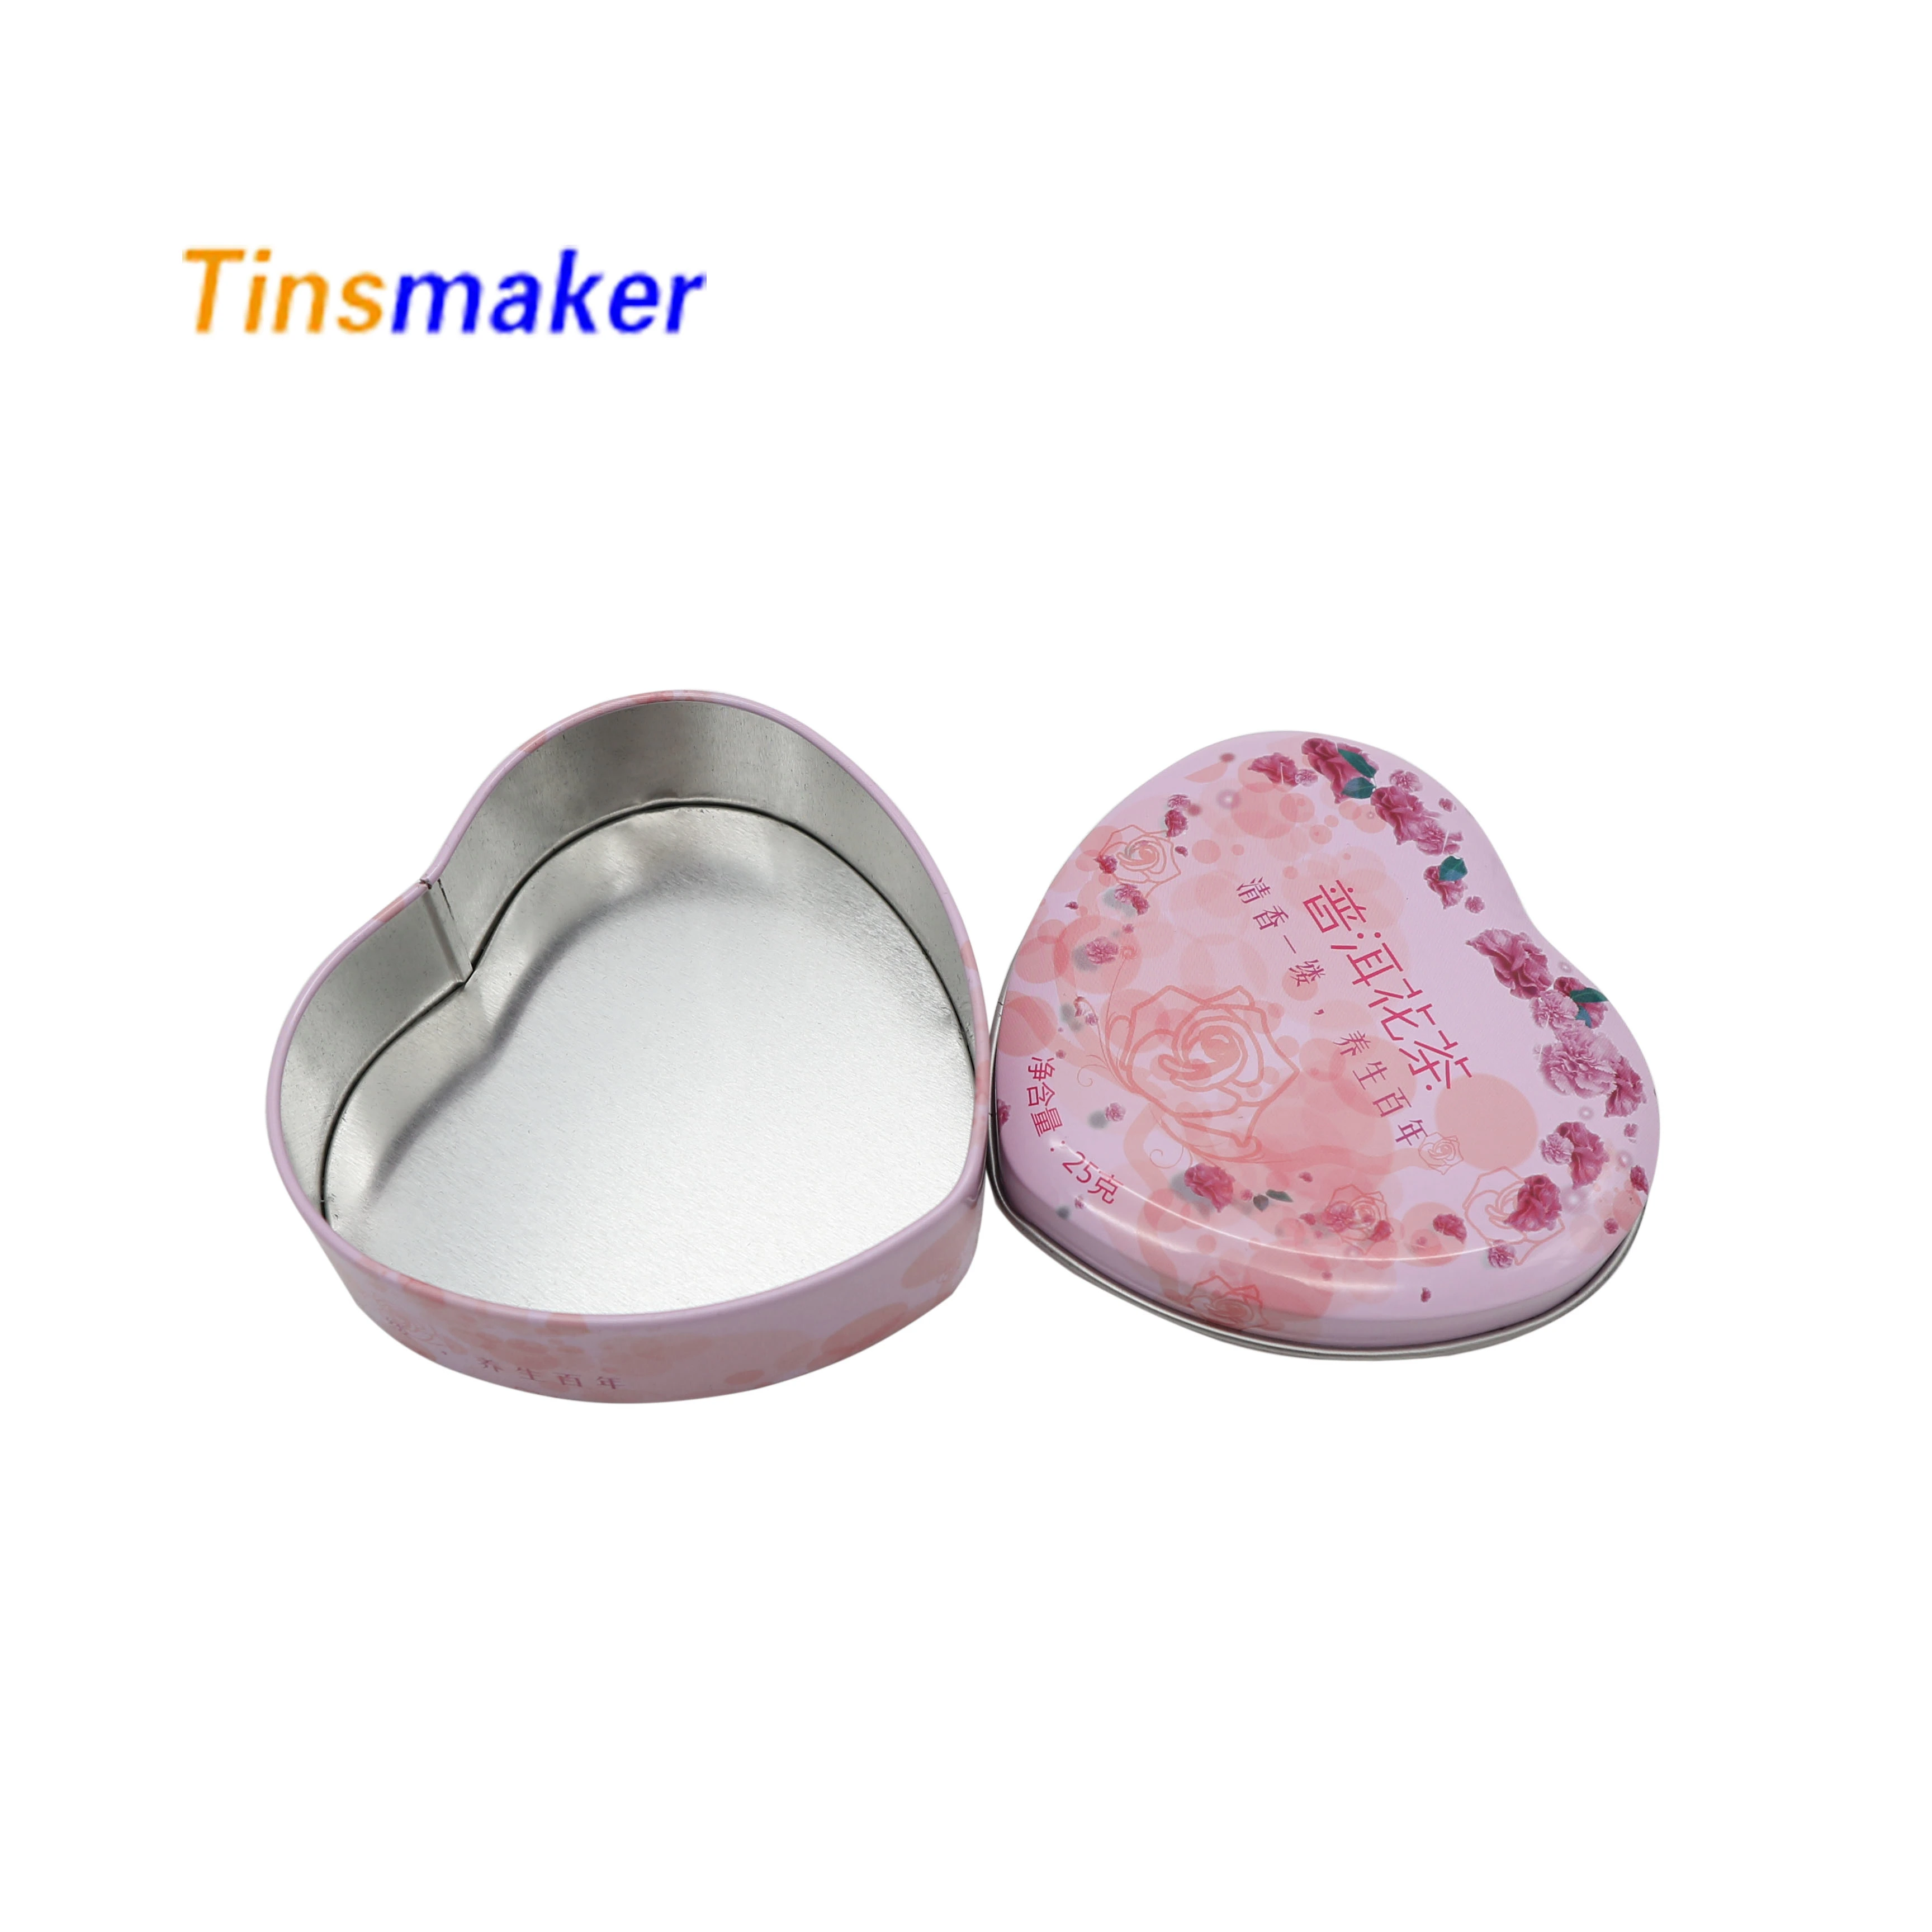 Wholesale Aluminum cosmetic tin containers metal cosmetic jar box aluminum beverage cans tin cans for candles custom box